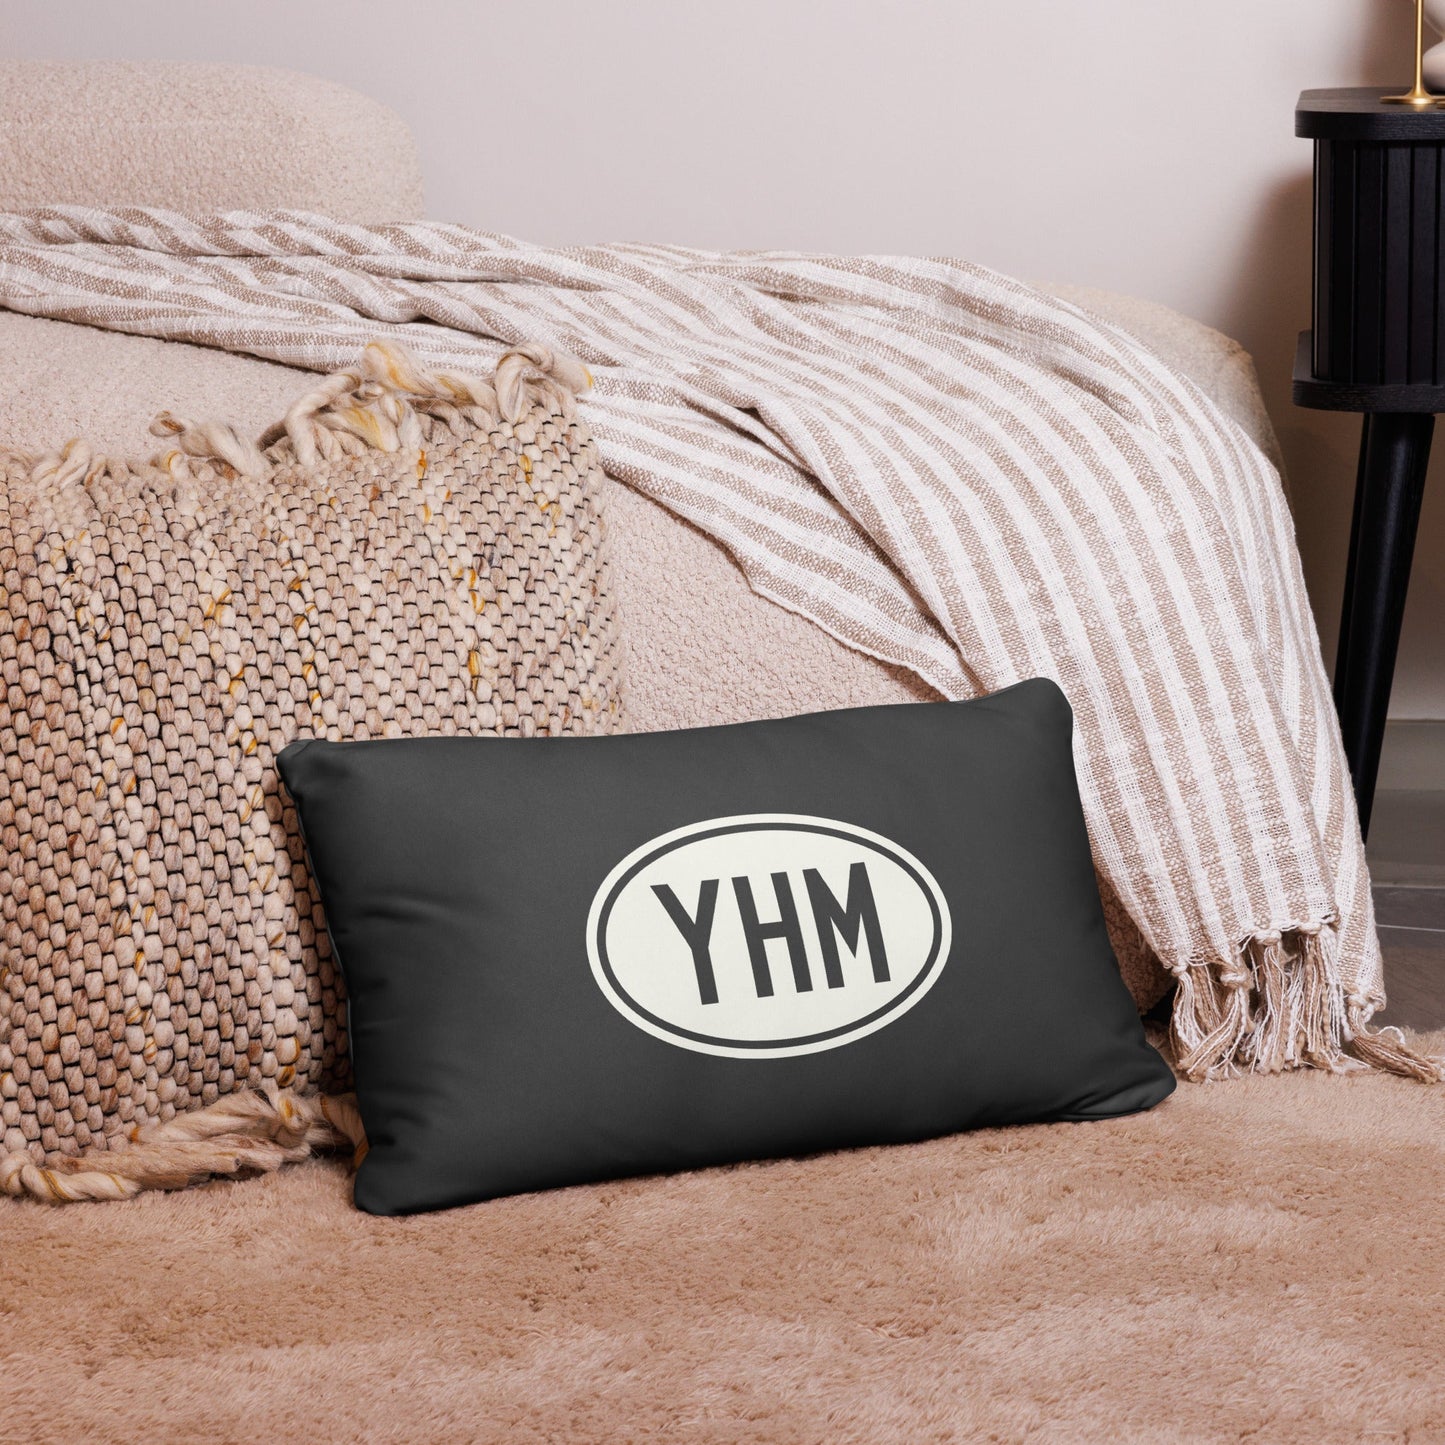 Unique Travel Gift Throw Pillow - White Oval • YWG Winnipeg • YHM Designs - Image 05